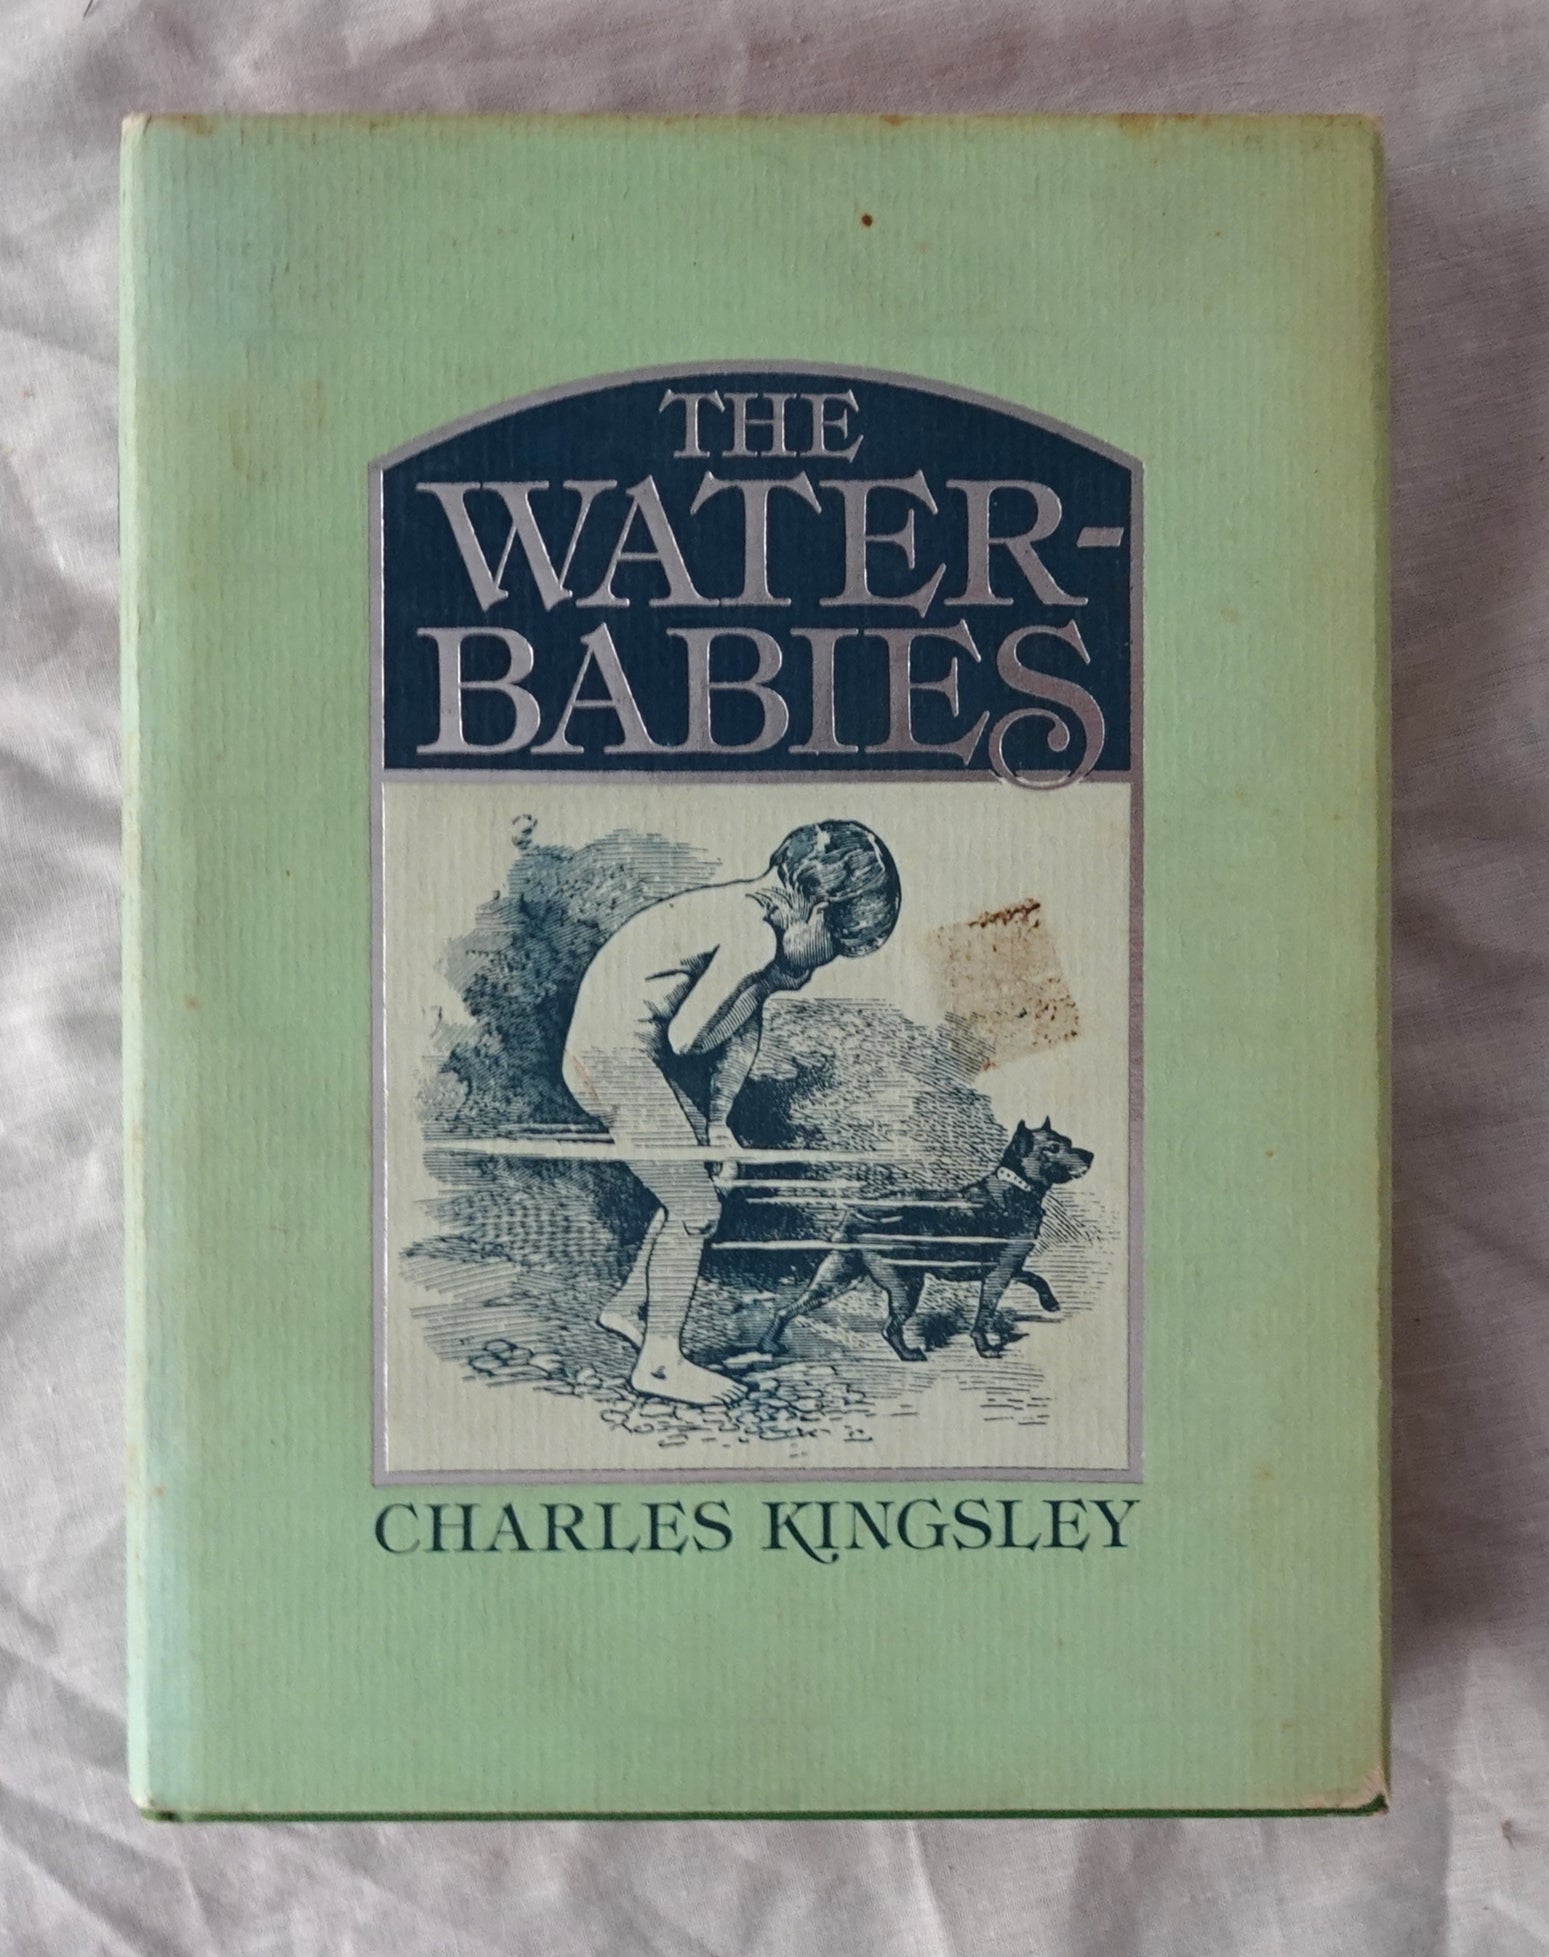 The Water-Babies  A Fairy Tale for a Land-Baby  by Charles Kingsley  Illustrated by Linley Sambourne